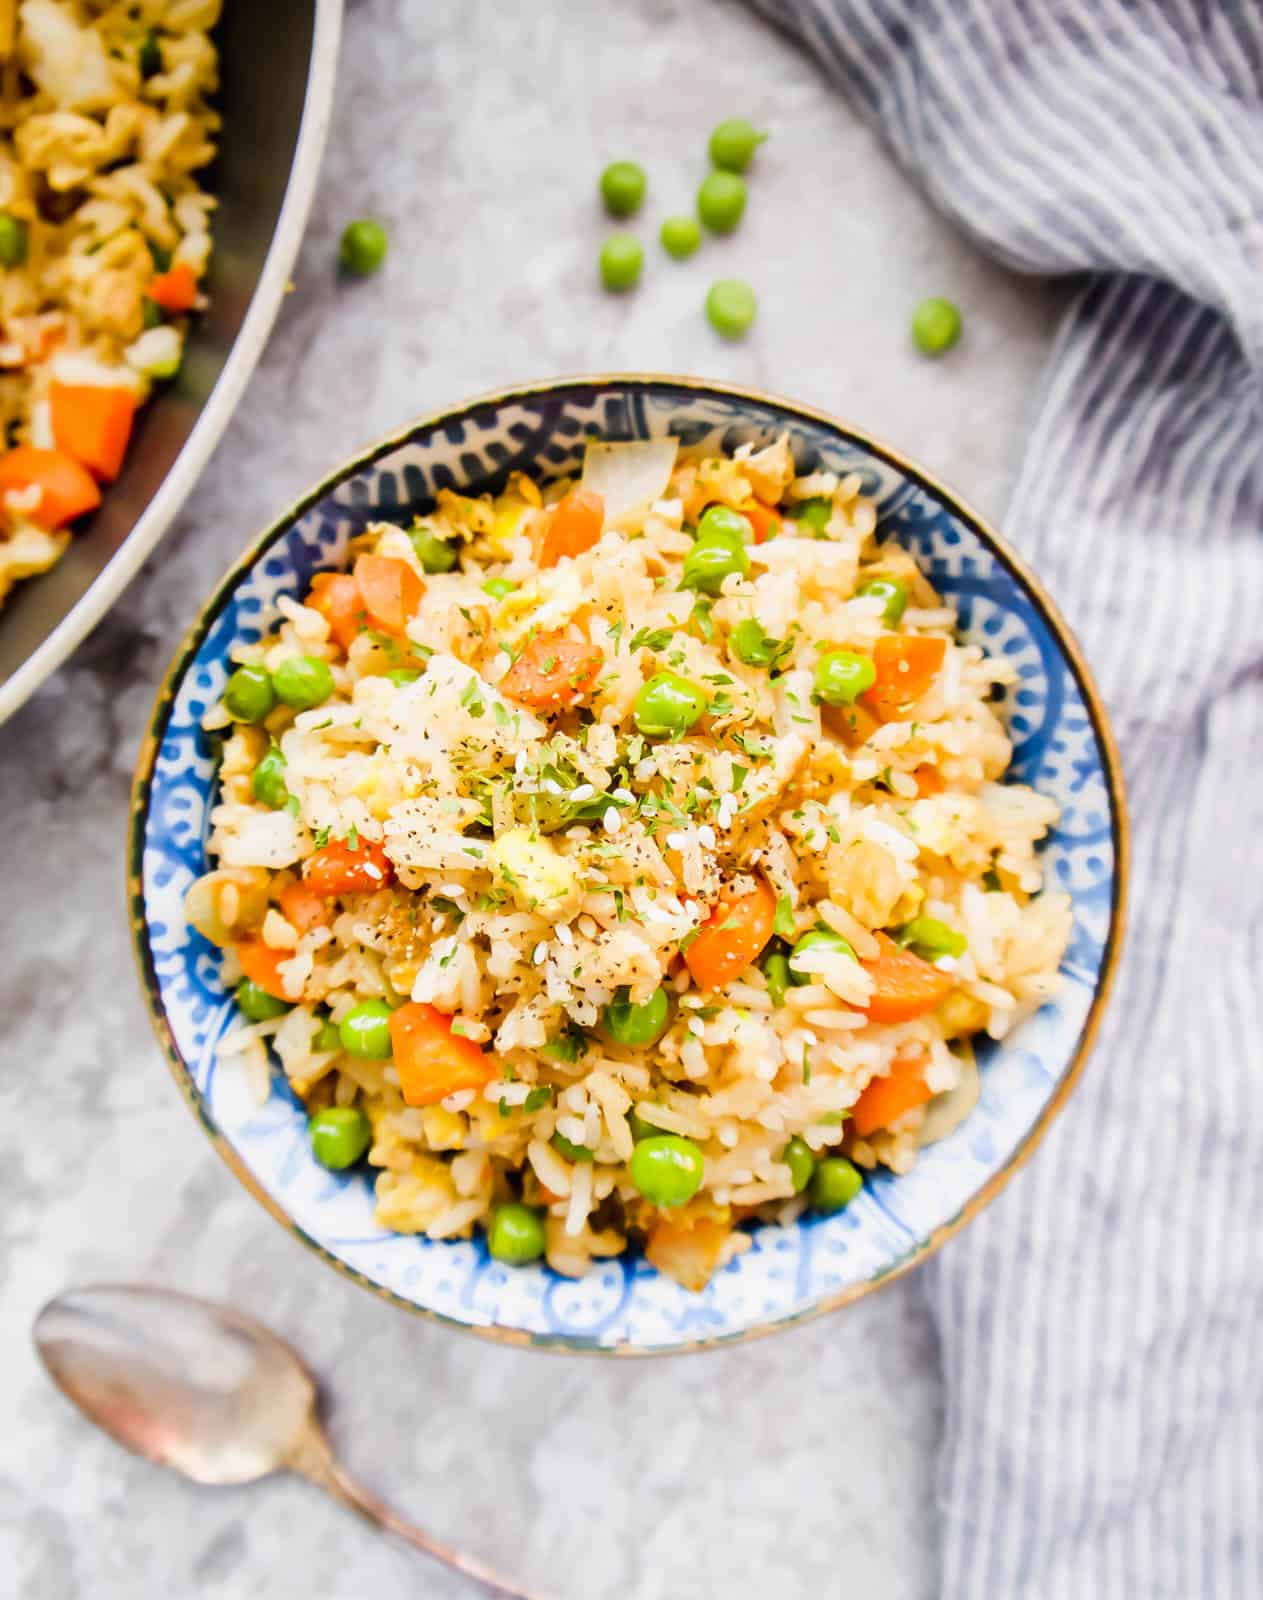 Coconut aminos fried rice in a bowl with sesame seeds on top.